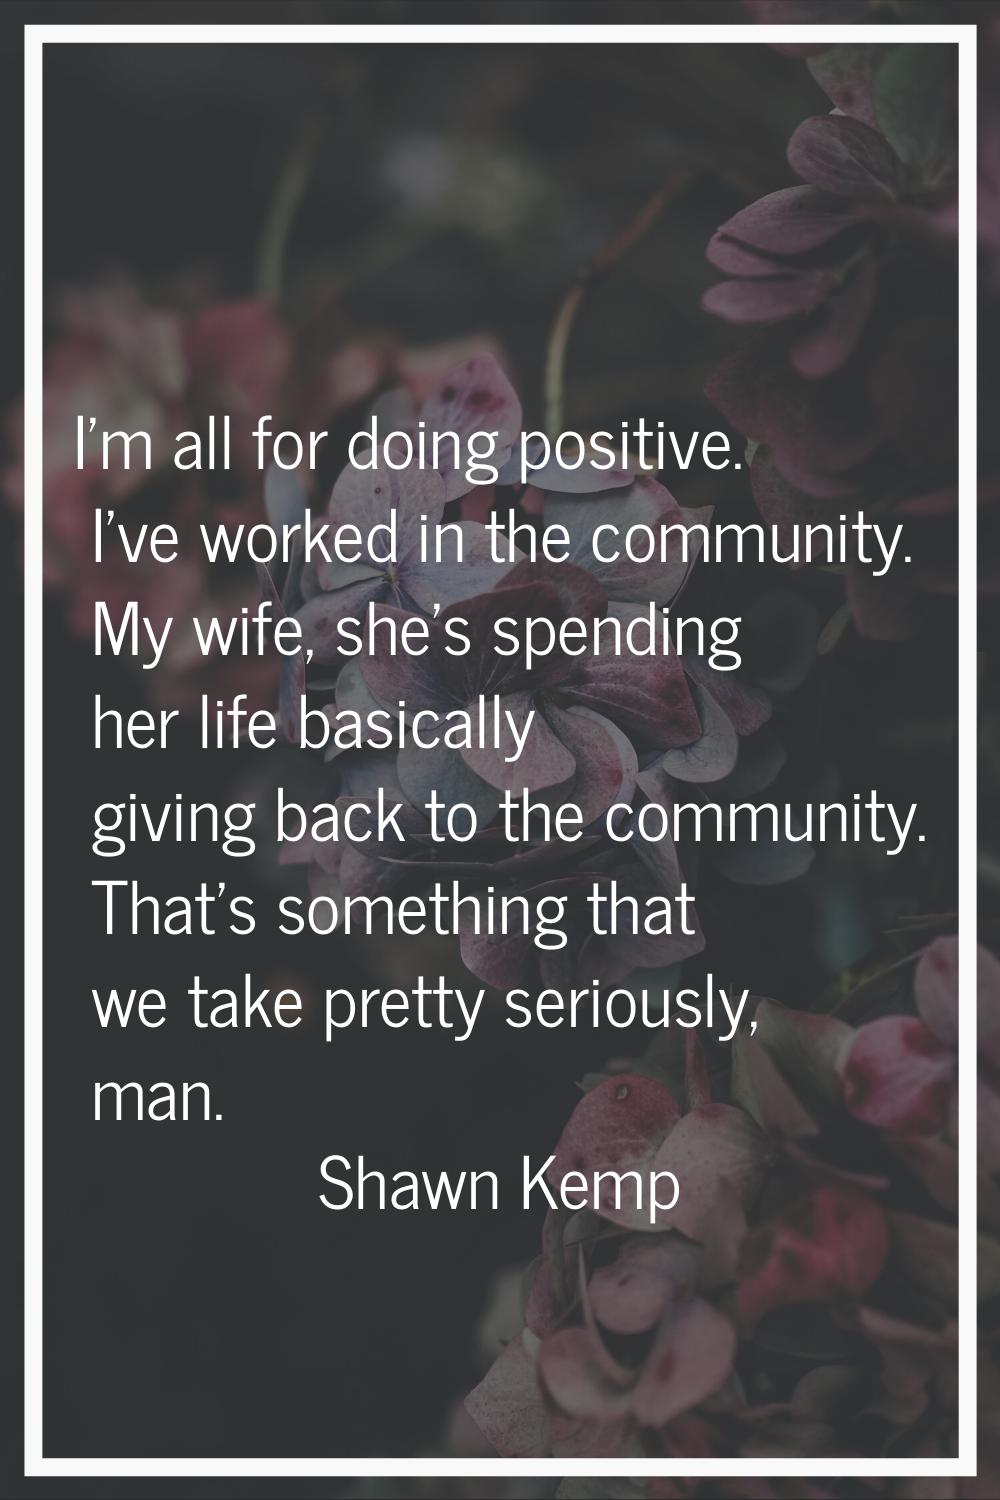 I'm all for doing positive. I've worked in the community. My wife, she's spending her life basicall